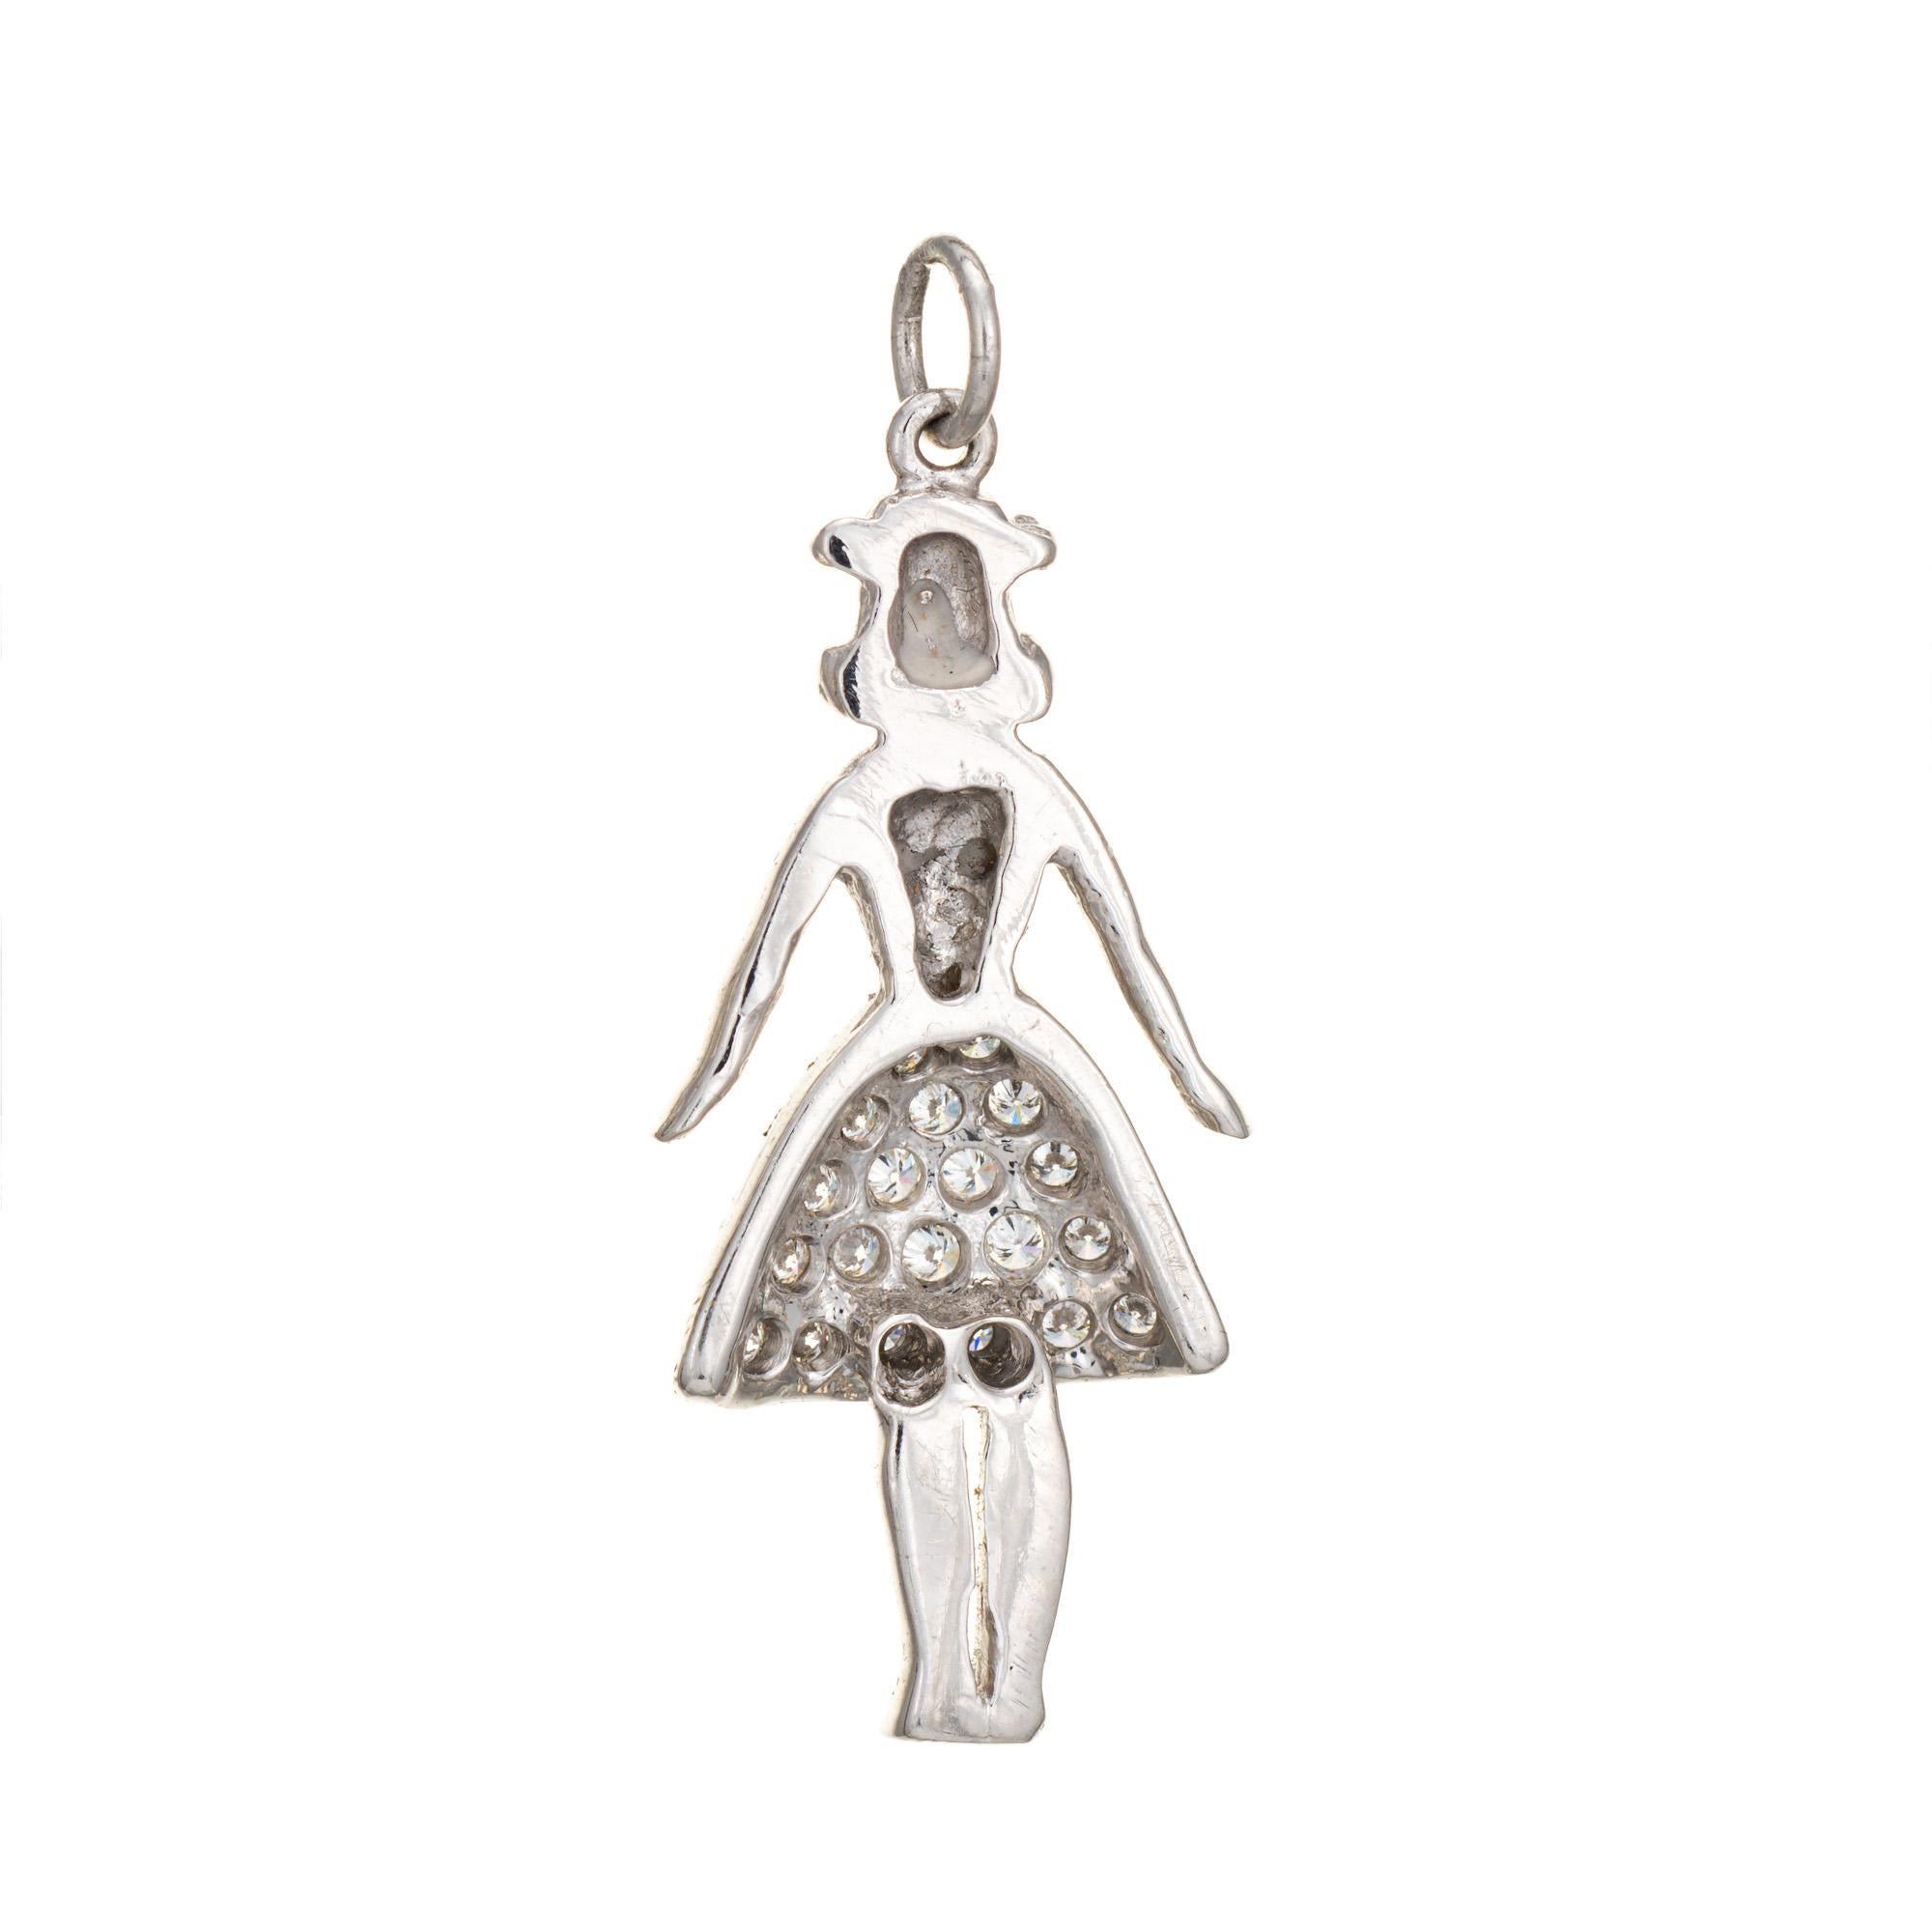 Finely detailed vintage Art Deco era charm crafted in 900 platinum (circa 1920s to 1930s).  

20 round brilliant cut diamonds total an estimated 0.10 carats (estimated at H-I color and VS2-SI1 clarity).

The sweet and petite charm depicts a woman